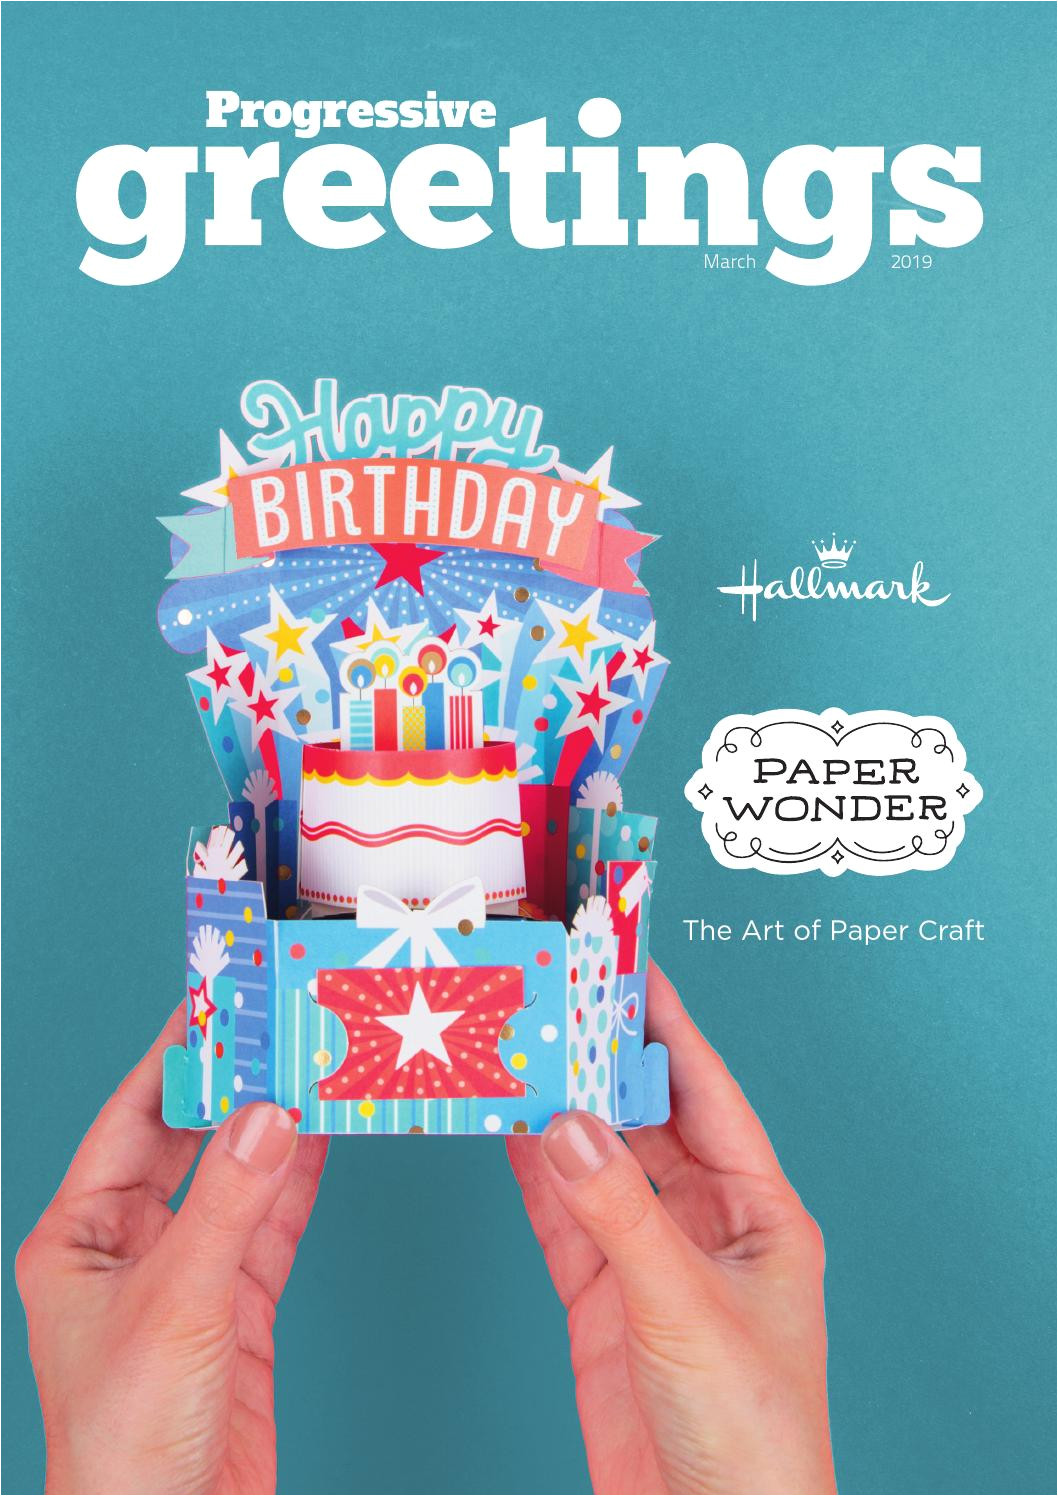 Greeting Card Companies New Zealand Progressive Greetings March 2019 by Max Media Group issuu